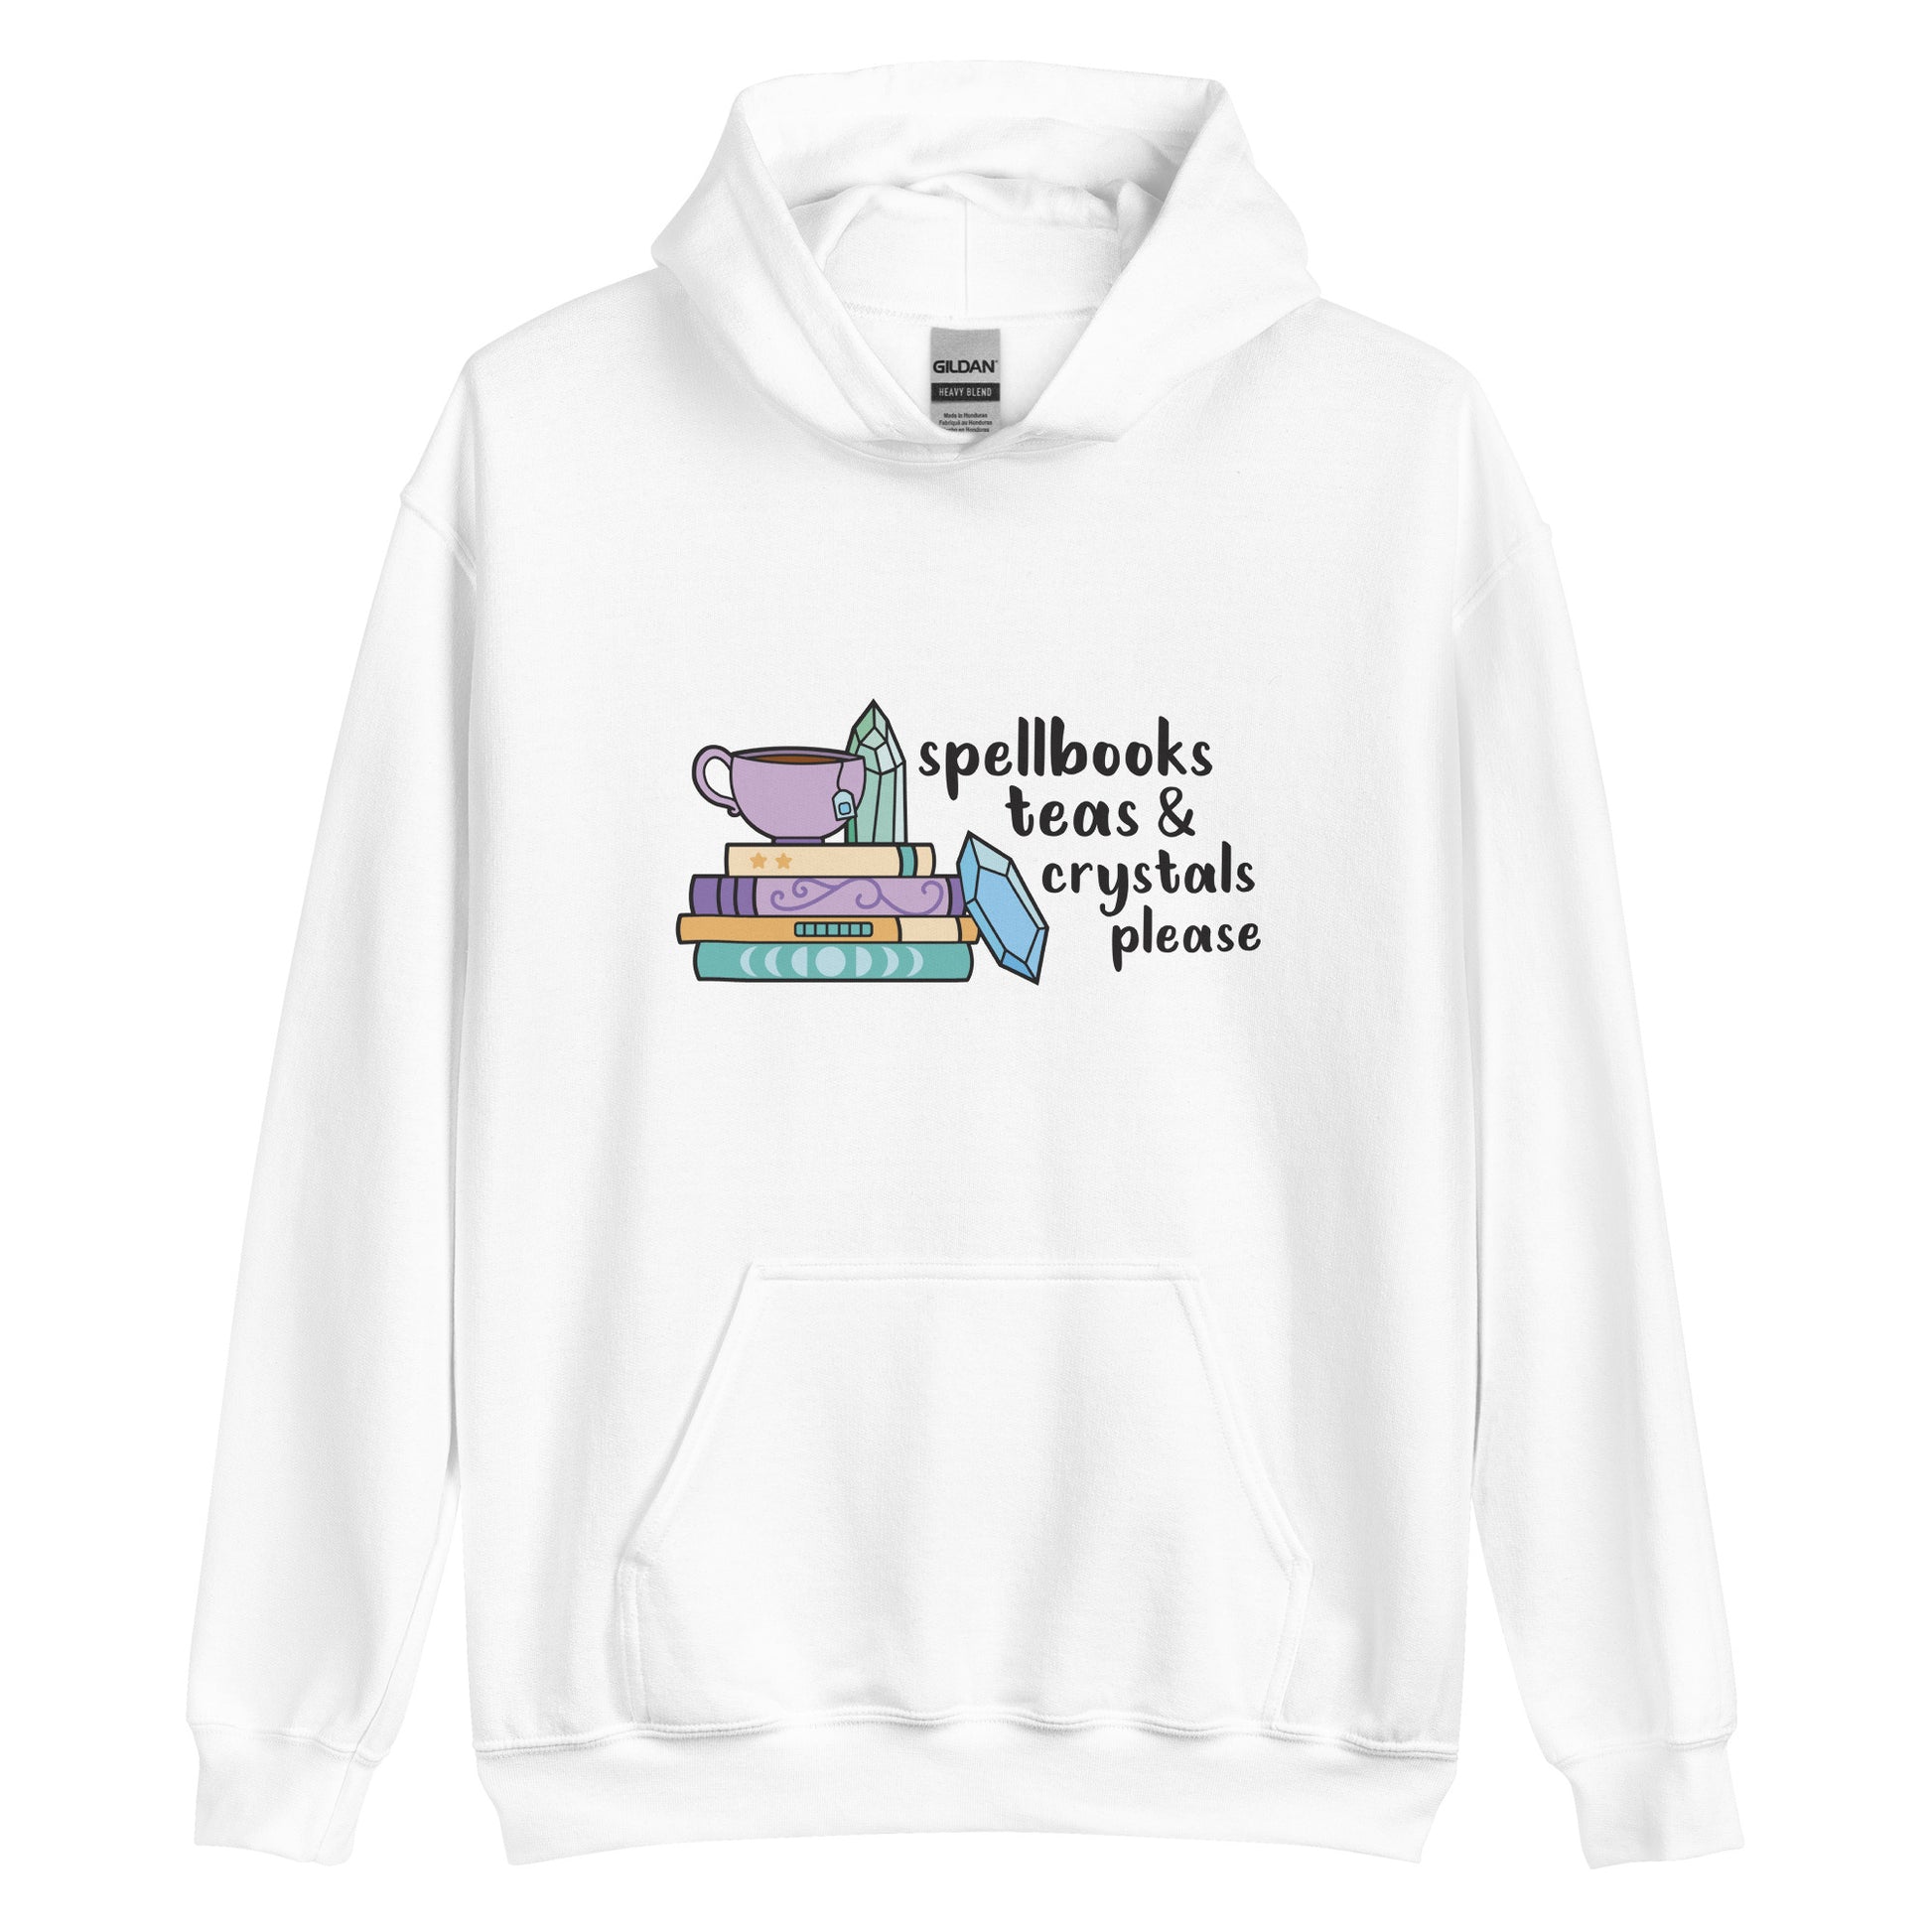 A white hooded sweatshirt featuring an illustration of a stack of spellbooks with a teacup and a crystal resting on top. Another crystal rests on the side of the stack, and text next to the illustration reads "Spellbooks, teas & crystals please"